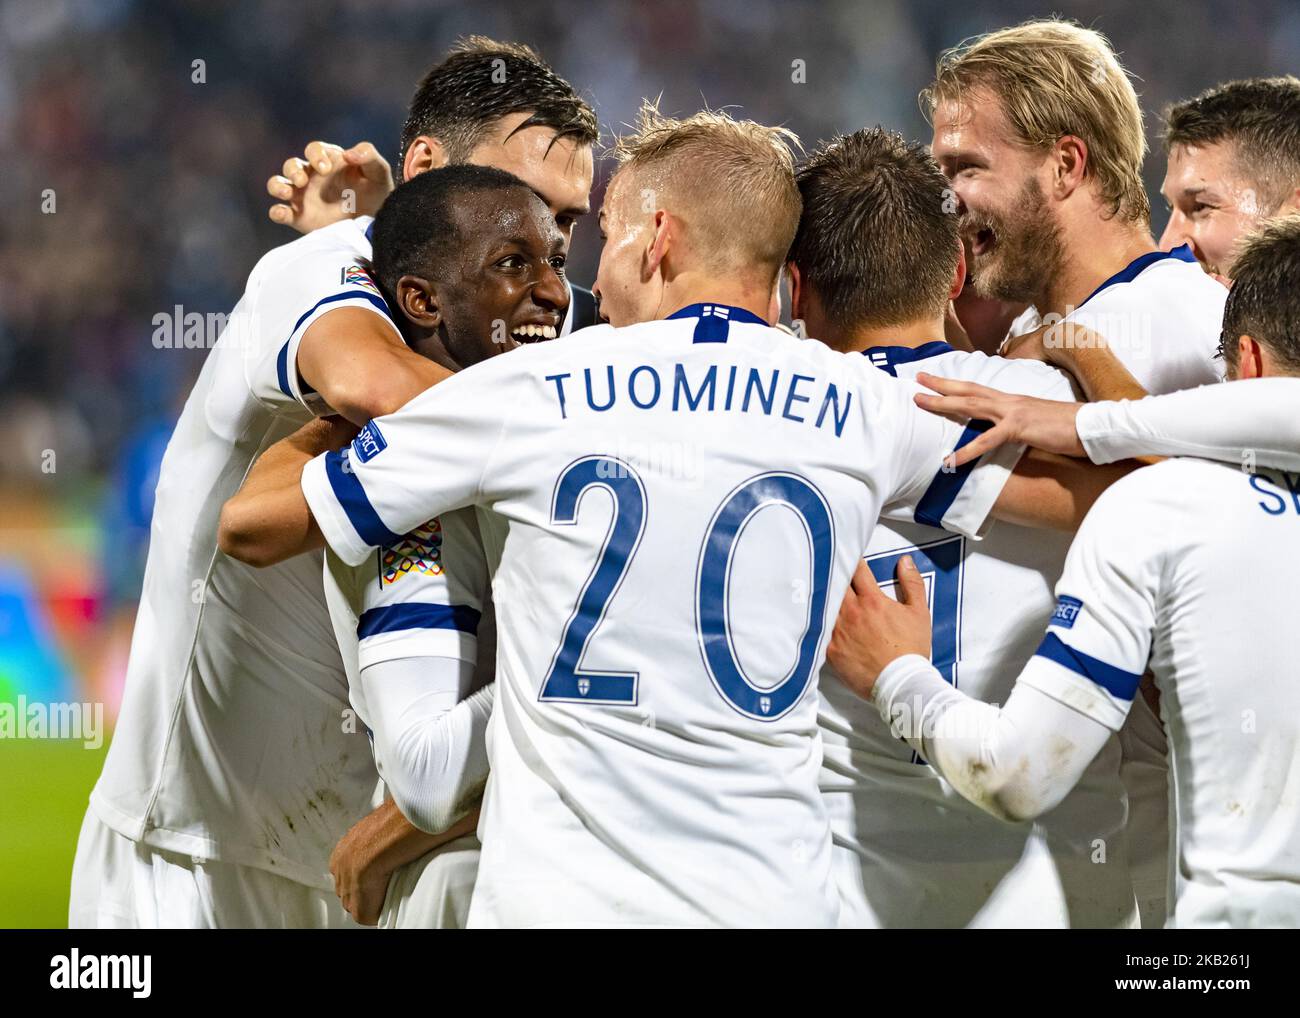 Jasse Tuominen of Finland celebrates scoring with his team-mates during the UEFA Nations League group stage football match Finland v Grece in Tampere, Finland on October 15, 2018. (Photo by Antti Yrjonen/NurPhoto) Stock Photo